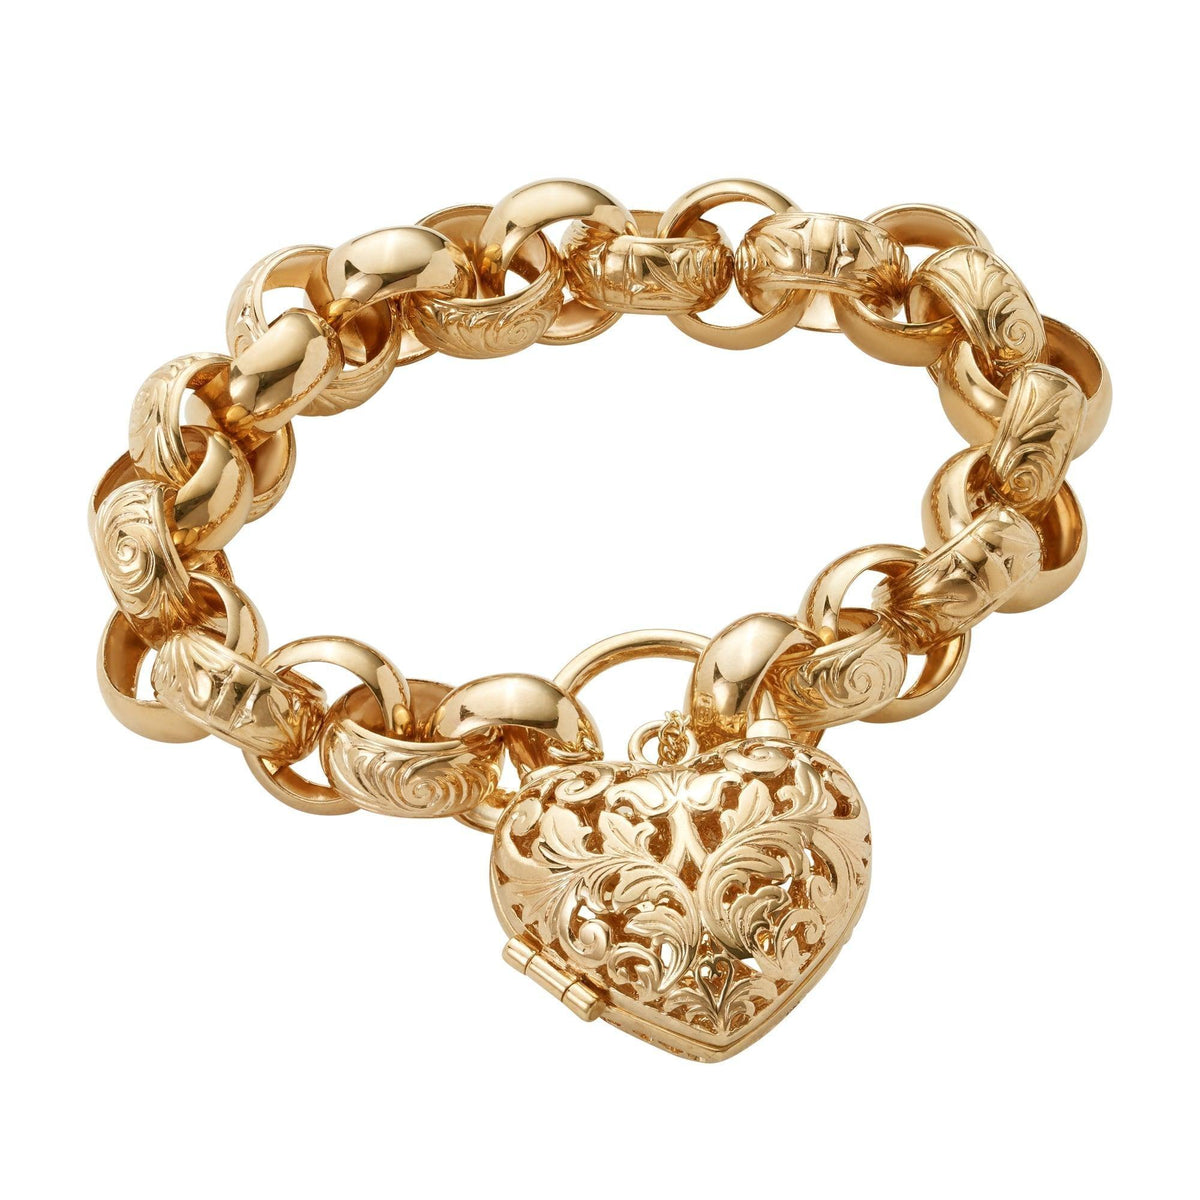 9ct Yellow Gold with 9ct White Gold Heart Charm Bracelet